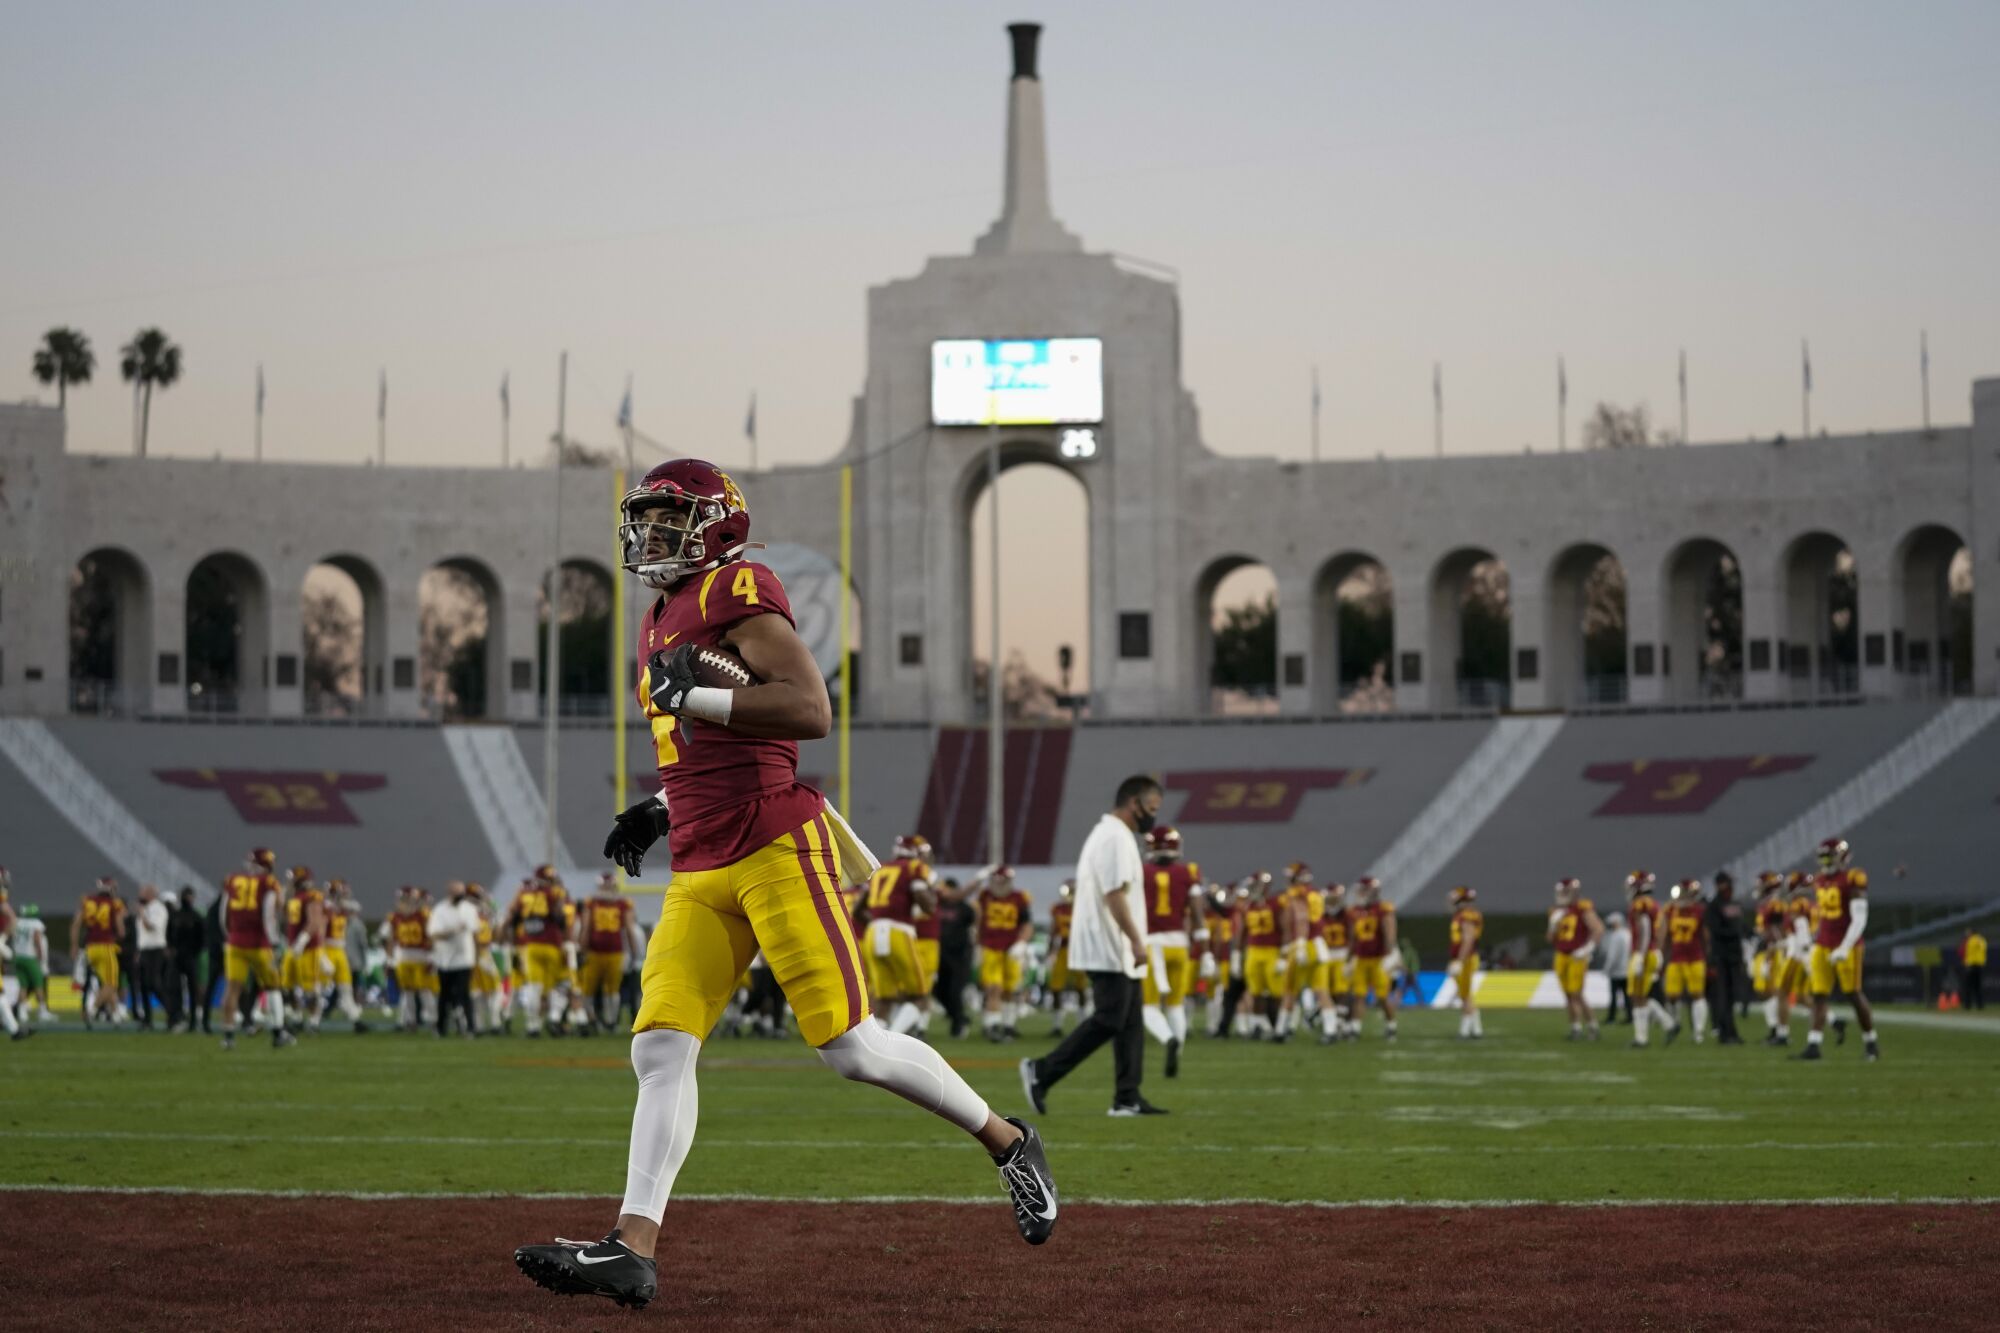 USC receiver Bru McCoy warms up on a football field